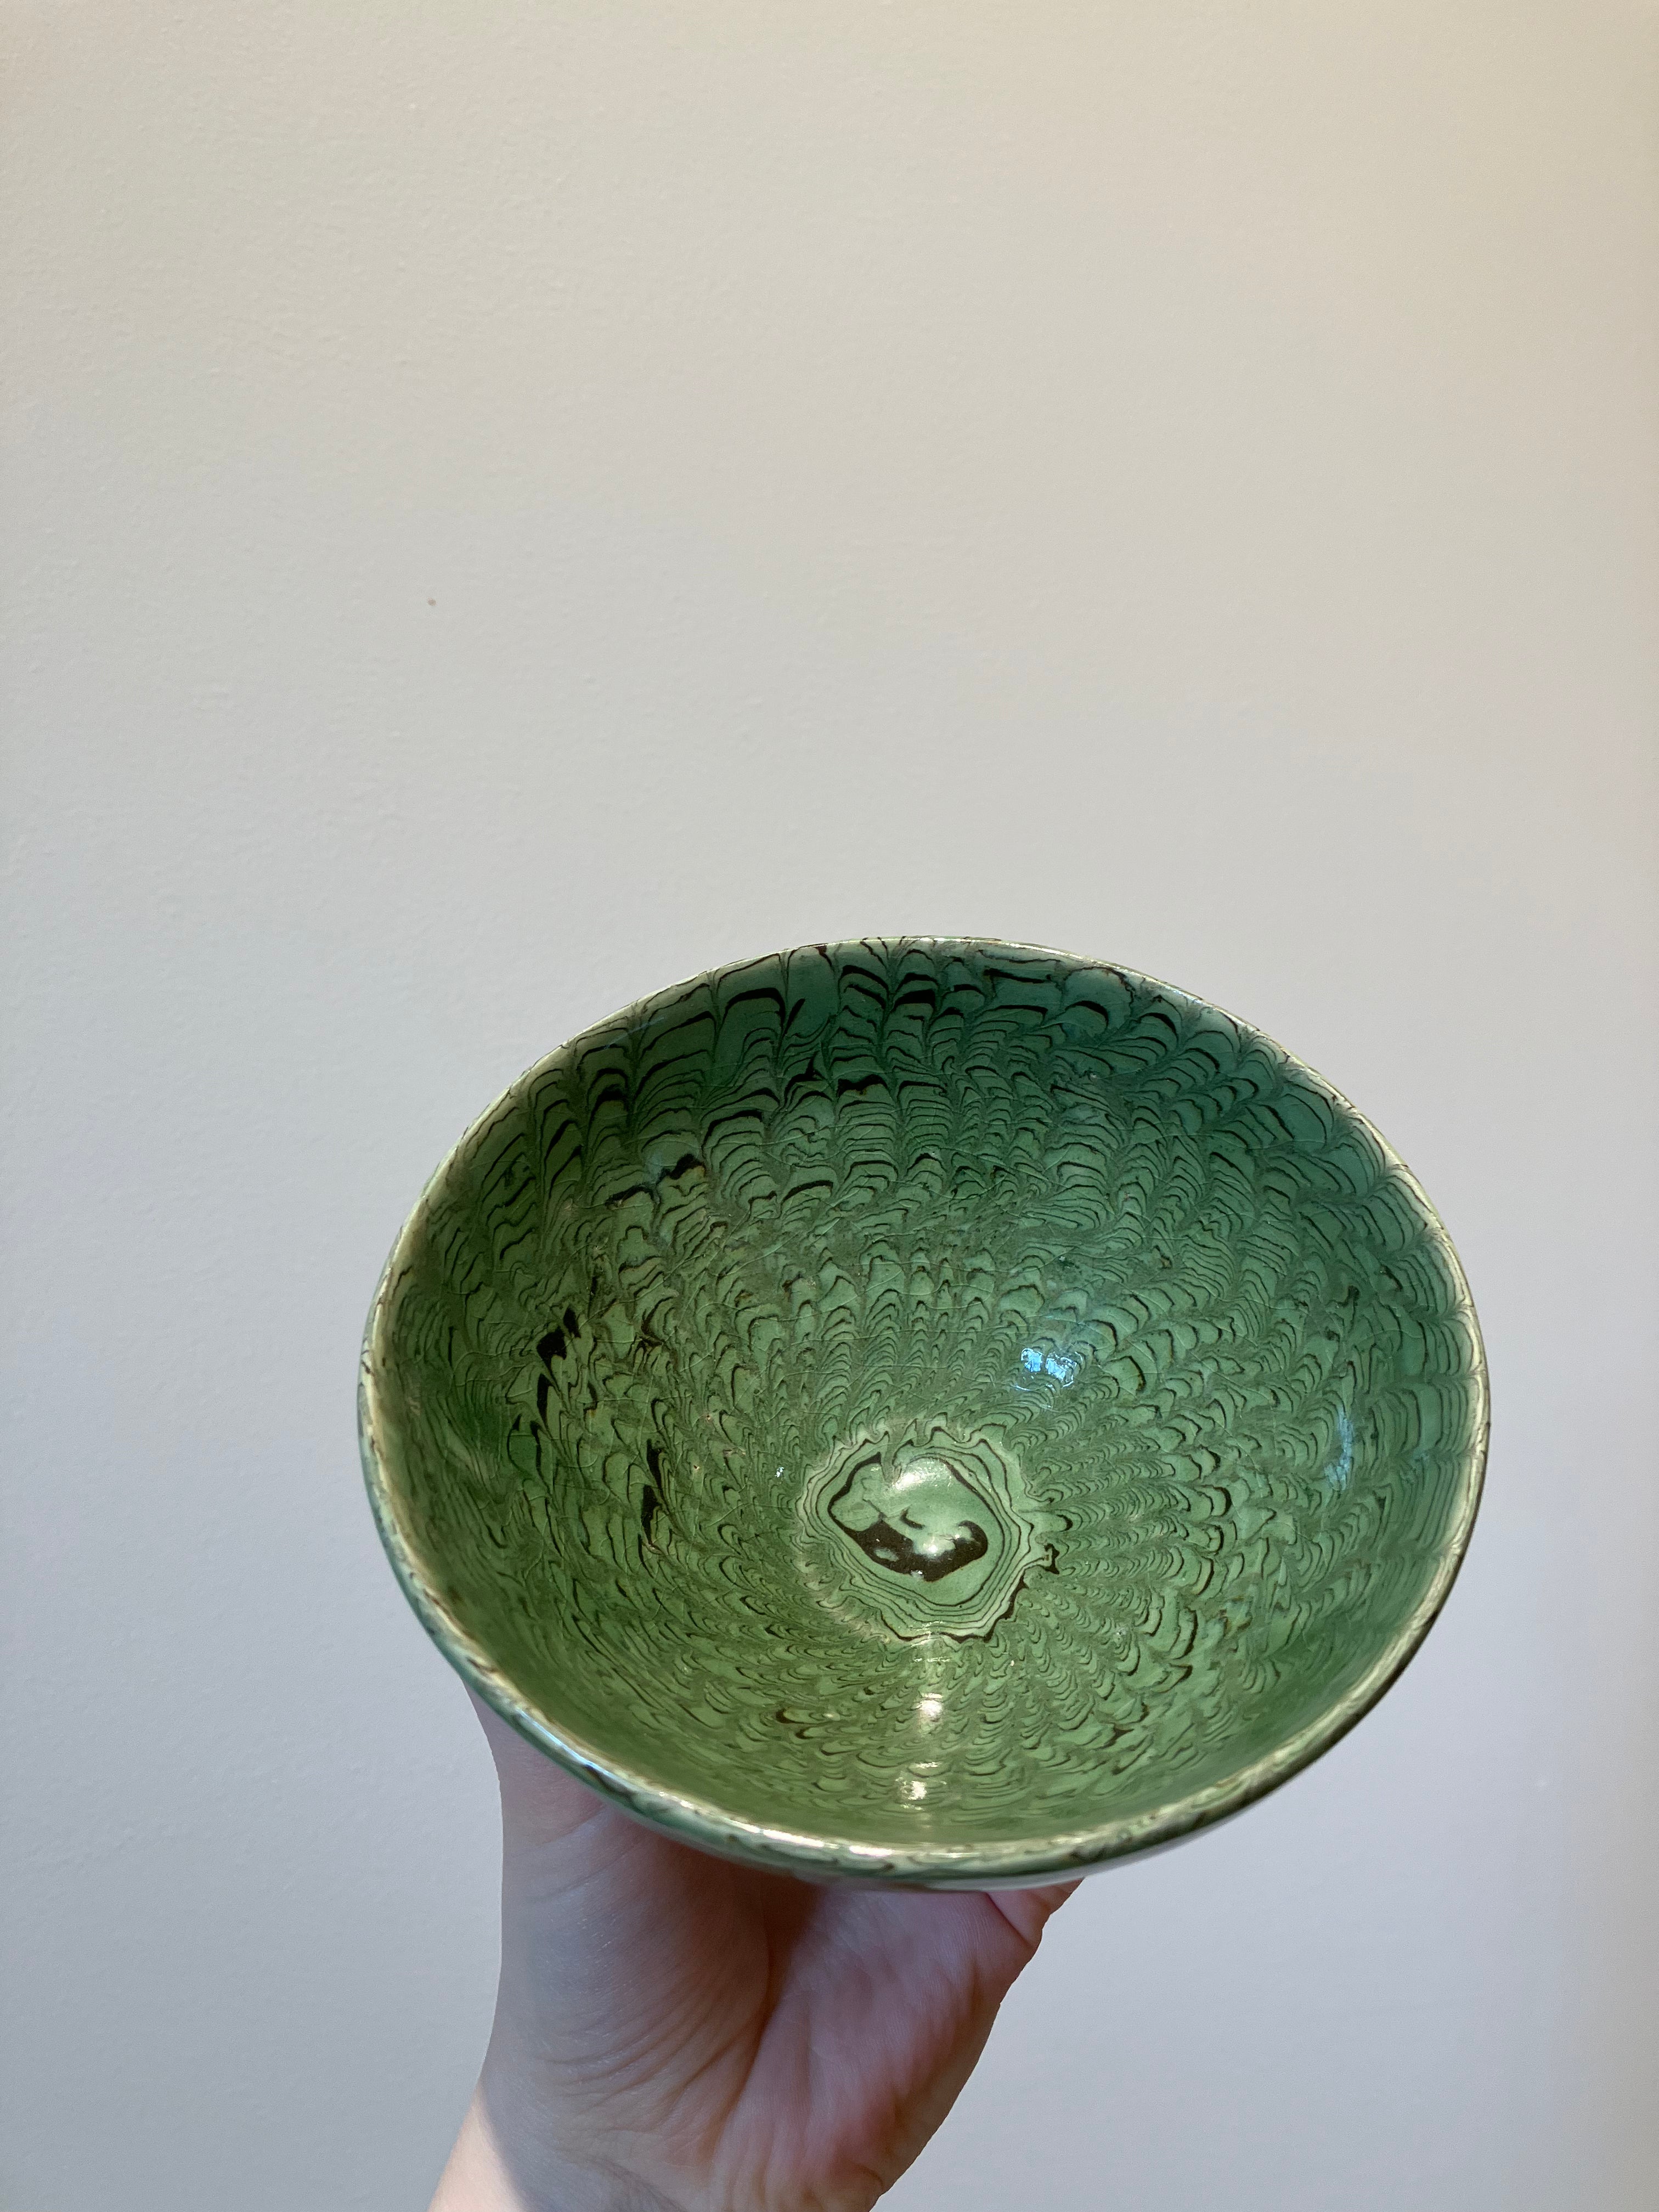 Handmade bowl in brown and green clay